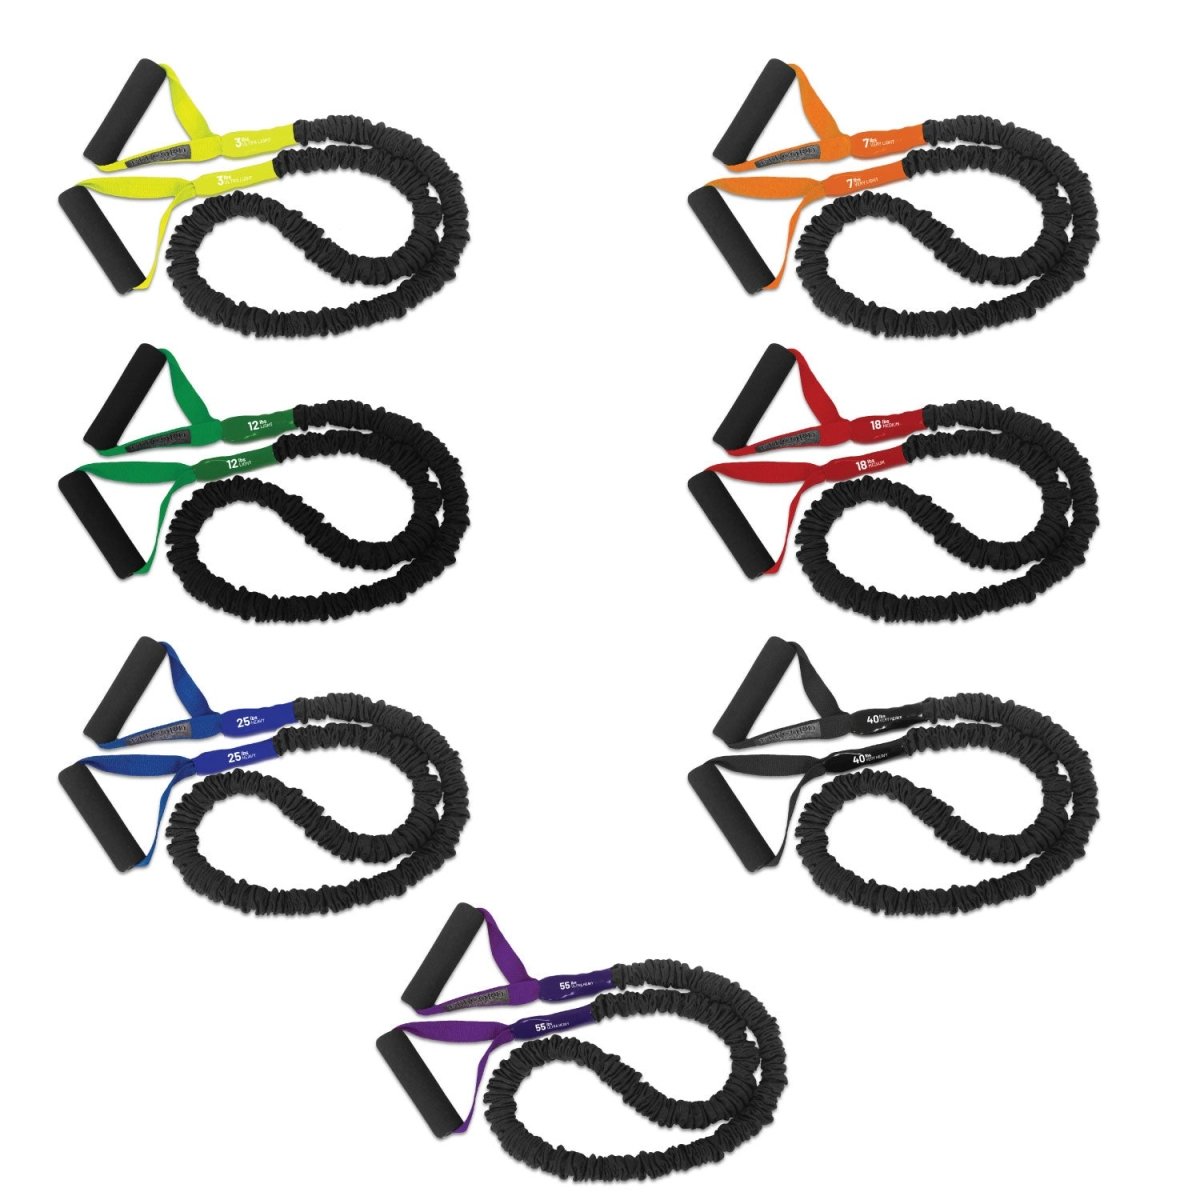 Best American made resistance bands with padded handle on both ends. No snap, covered tubing, tension training bands with a lifetime warranty and American Made Quality. Save money on exercise equipment. Buy Fitcord bands